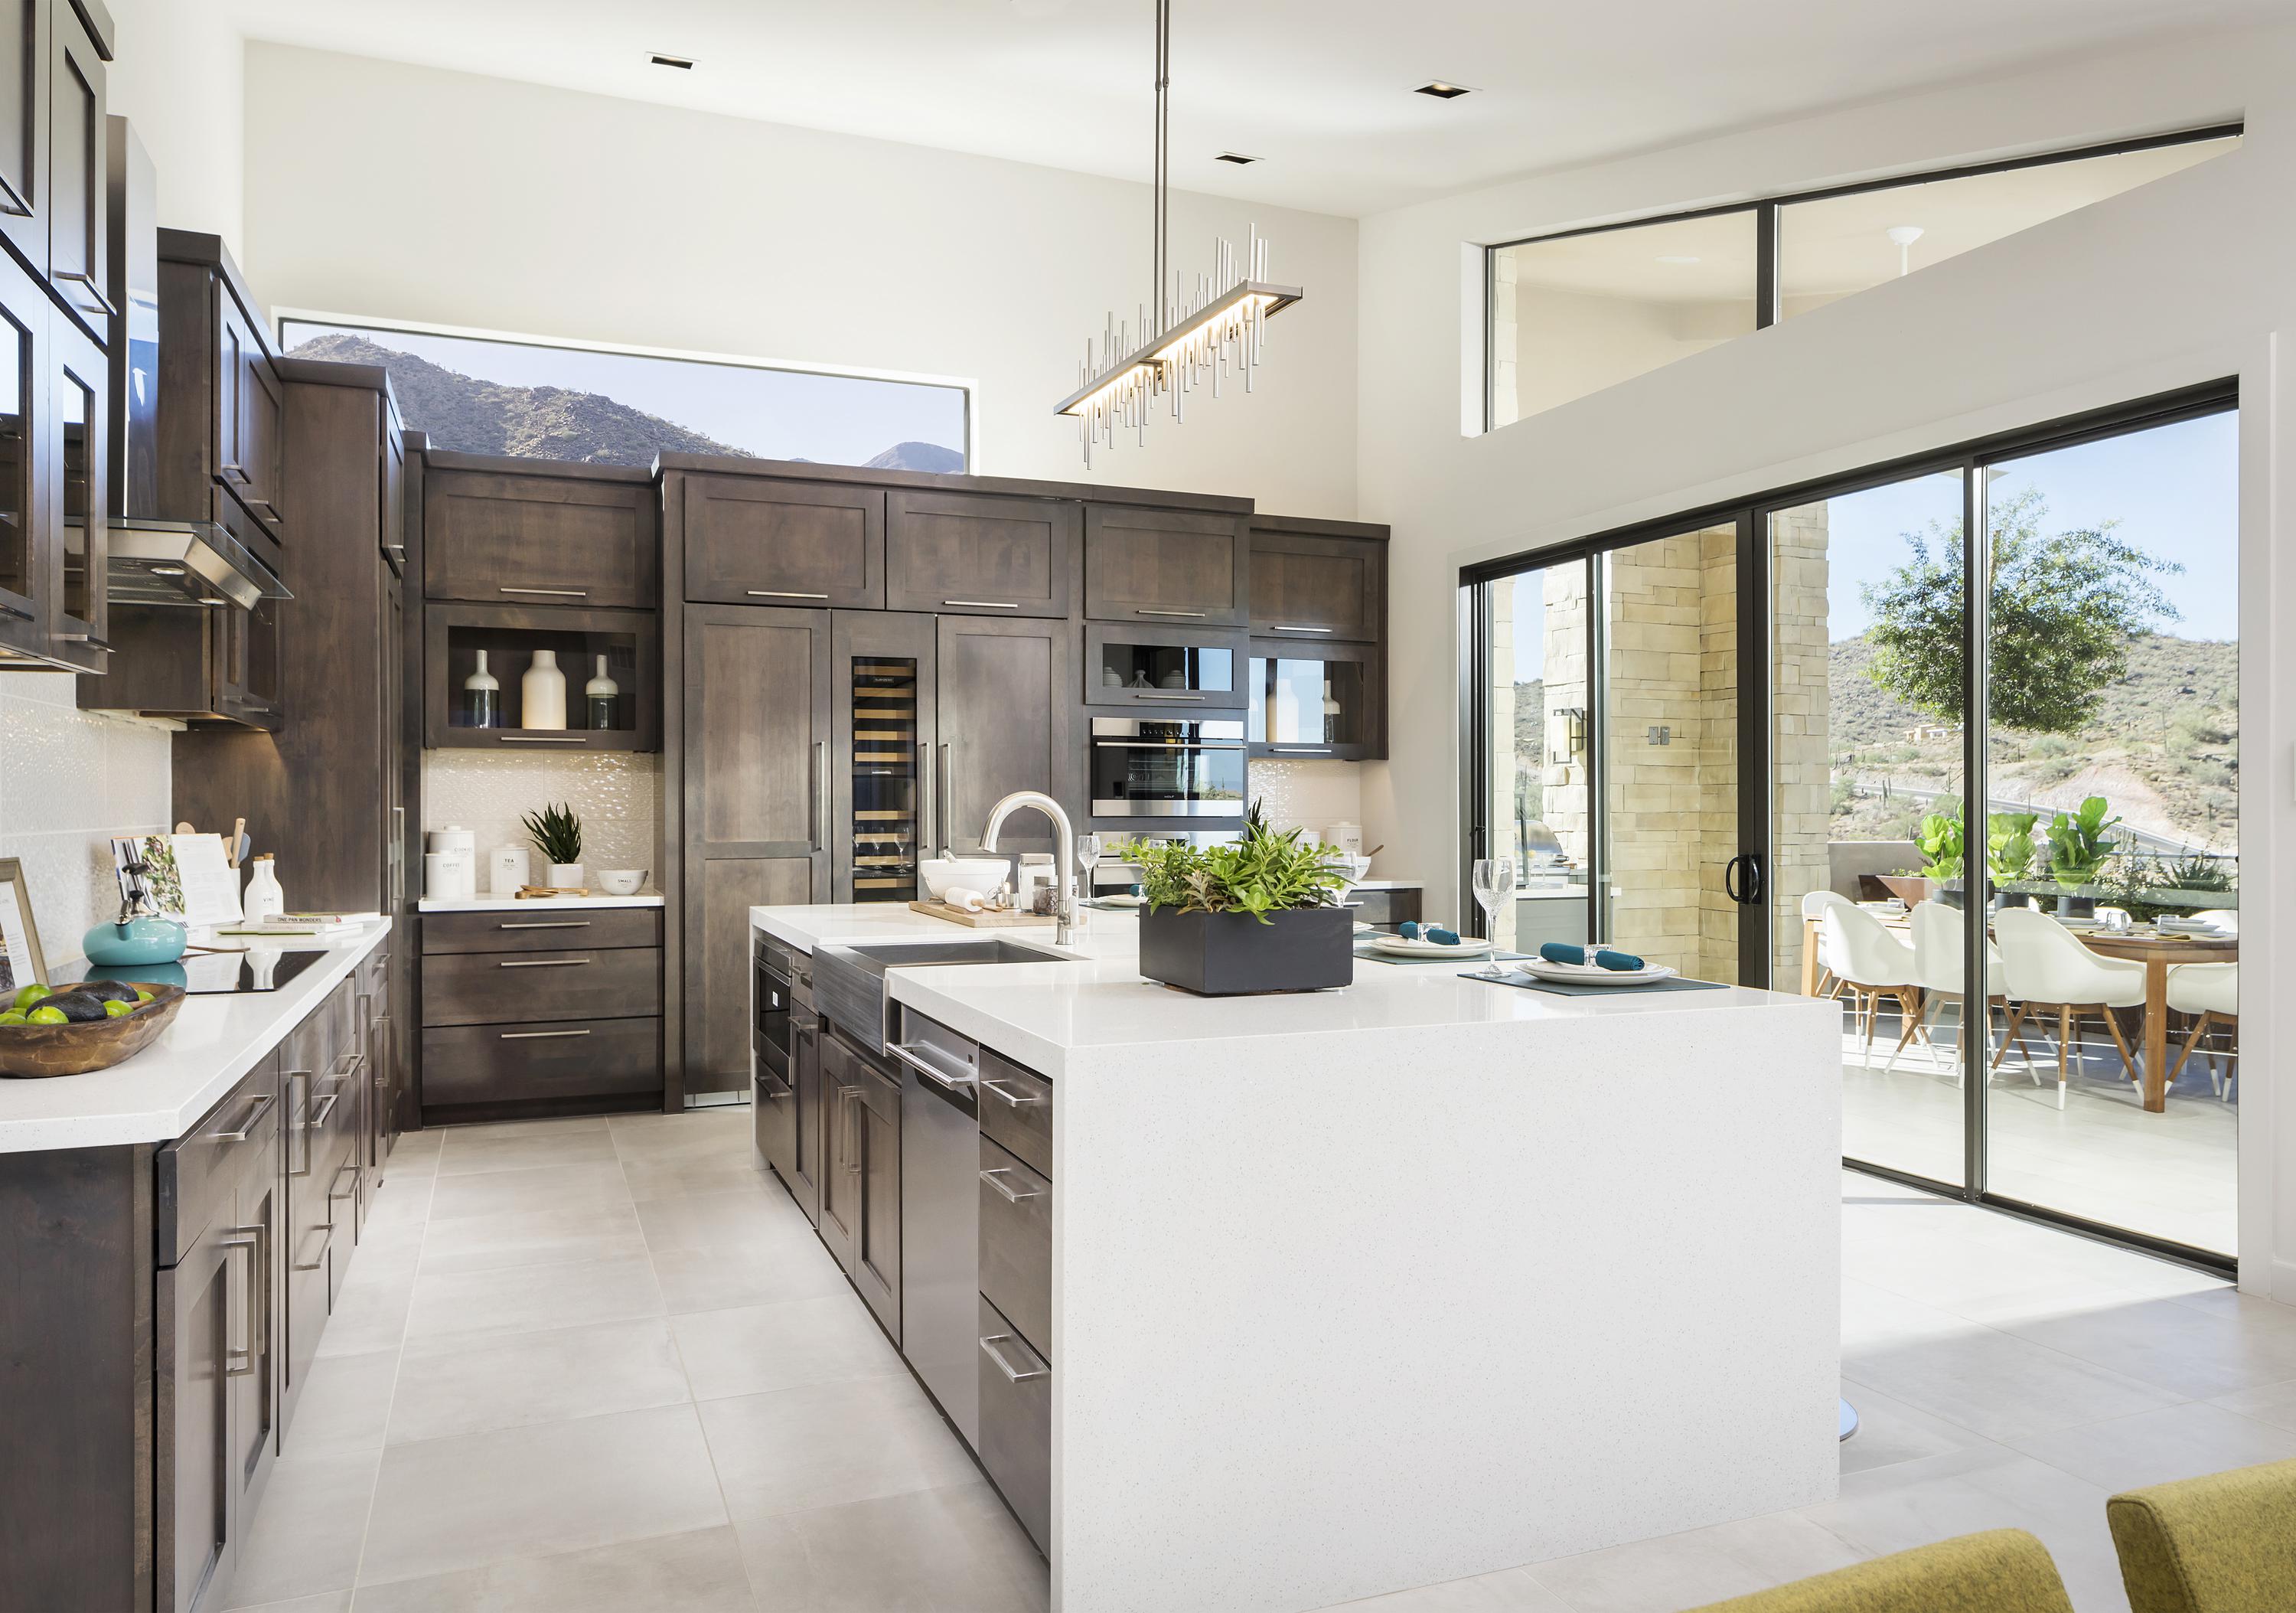 5 Reasons You Need A Professional Kitchen Designer